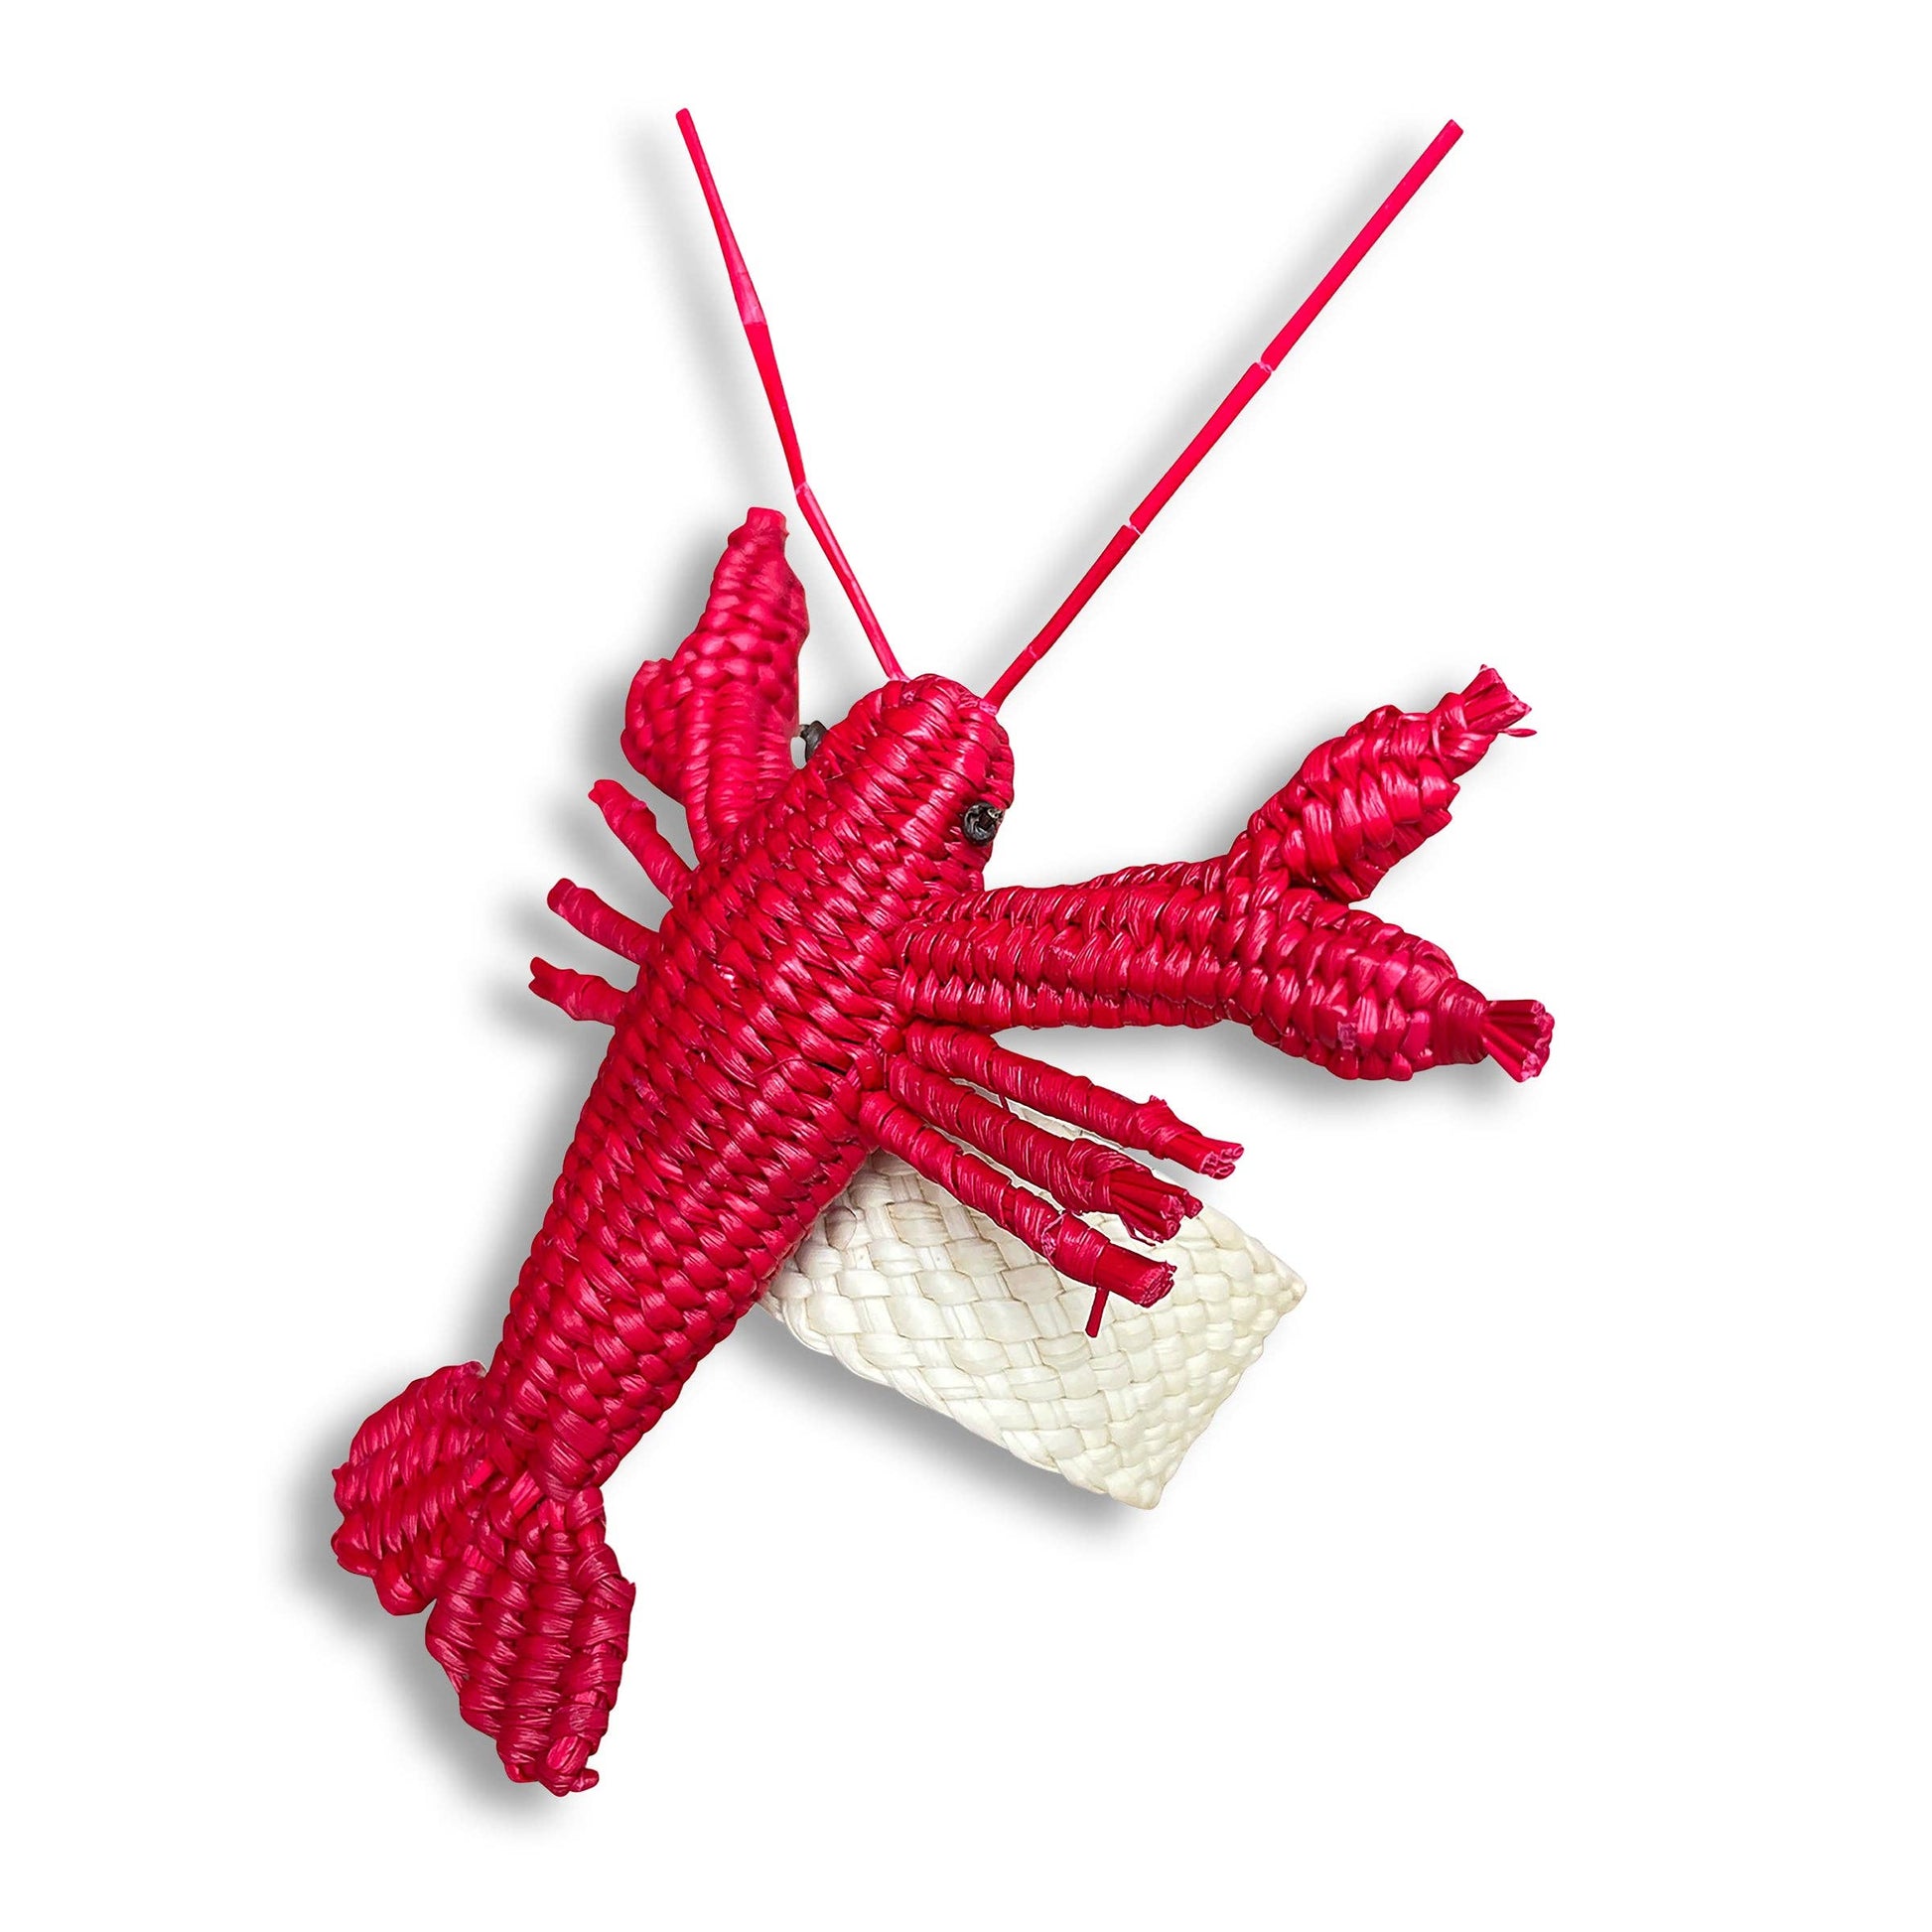 The Every Space Red raffia lobster napkin ring by Furbish Studio - handmade in Columbia